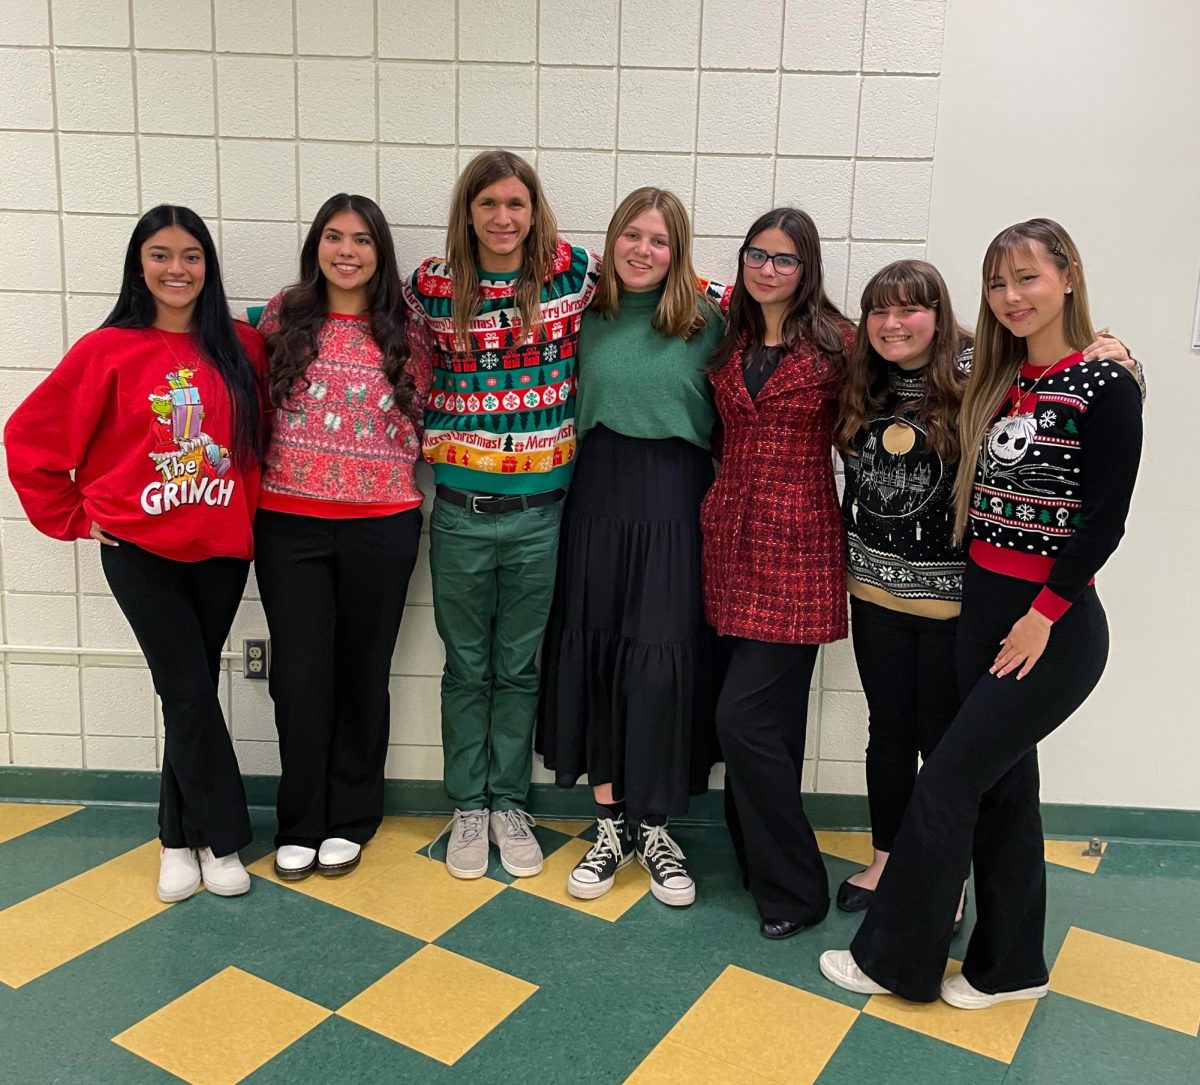 The Driller Forensics Team shows off their holiday spirit at the December tournament. Photo provided by Jennifer Thompson.